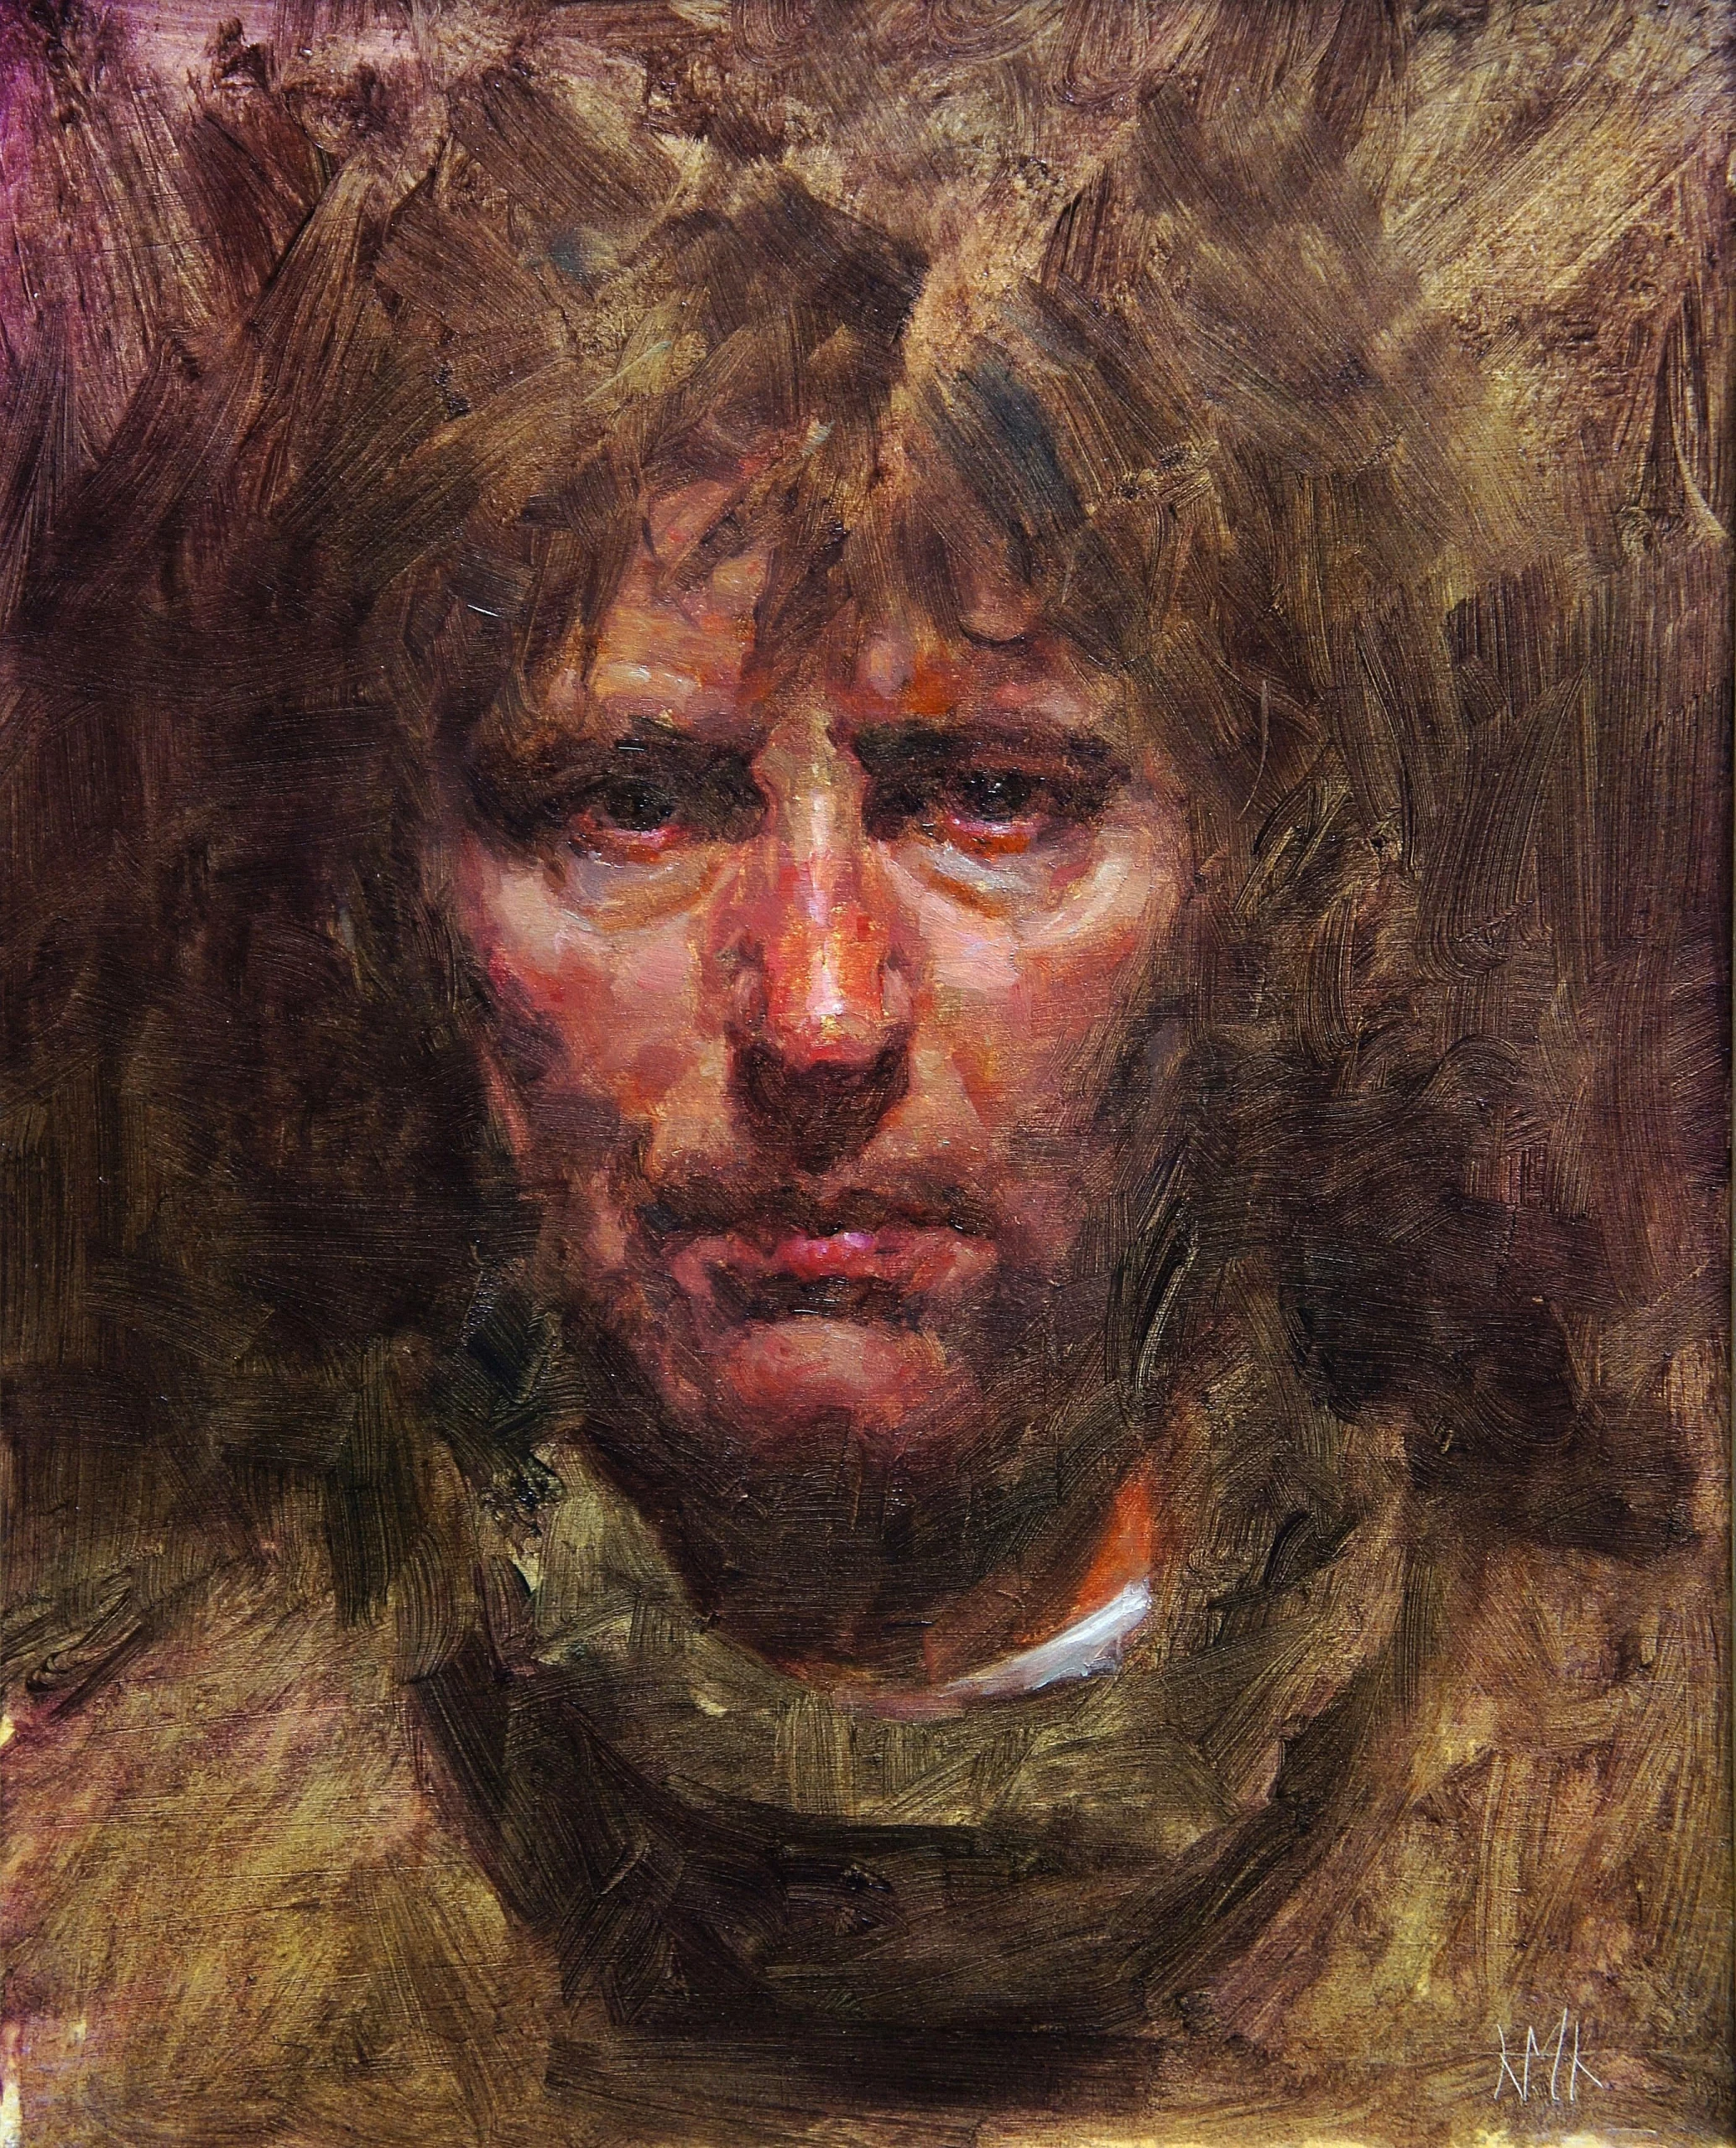 Kenny-McKendry Portrait artist of the year series